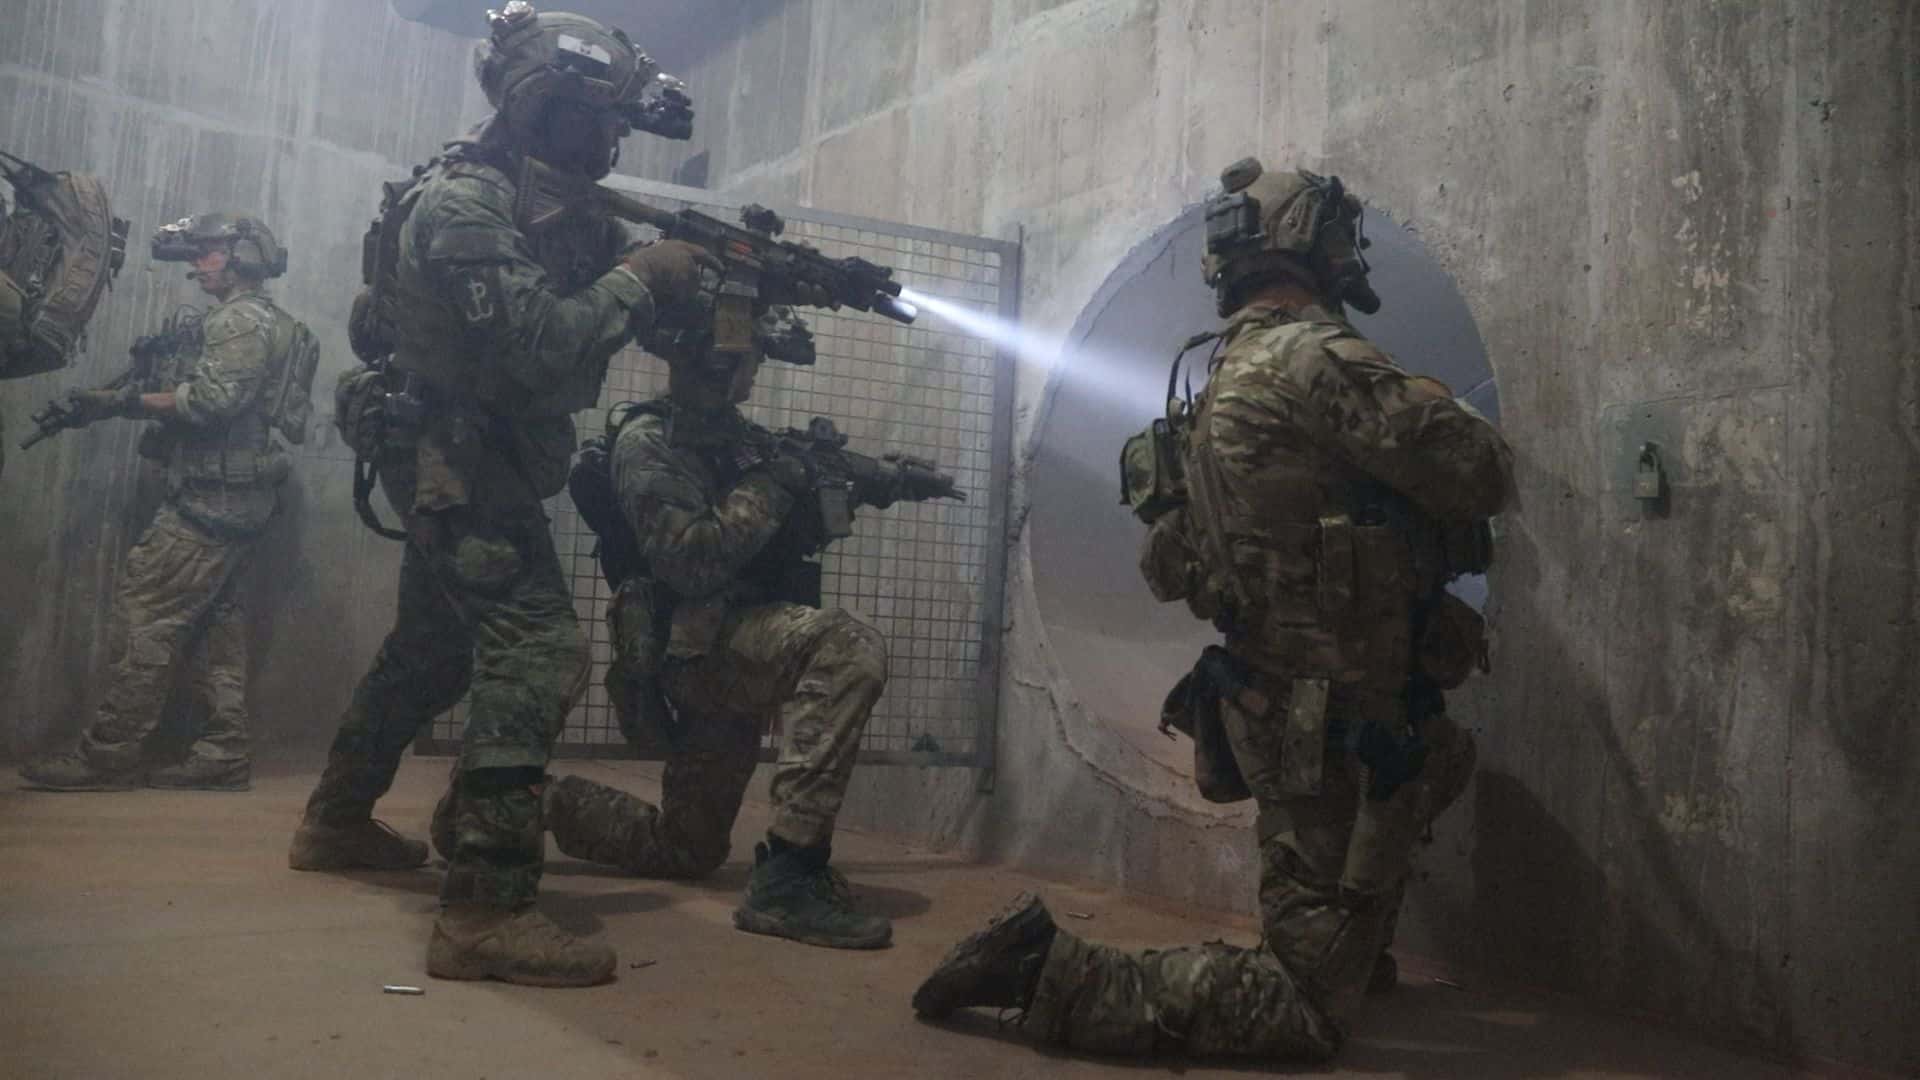 Green Berets assigned to 2nd Battalion, 10th Special Forces Group (Airborne), conduct Close-Quarters Combat shoulder to shoulder with Polish Special Operations Forces Operators on Fort Carson, Colorado, June 2, 2022. Polish and German Commandos honed CQC tactics, techniques and procedures (TTPs) alongside Special Forces Soldiers assigned to the 10th SFG(A) Critical Threats Advisory Company from May 2 – June 3. (U.S. Army photo by Staff Sgt. Anthony Bryant)